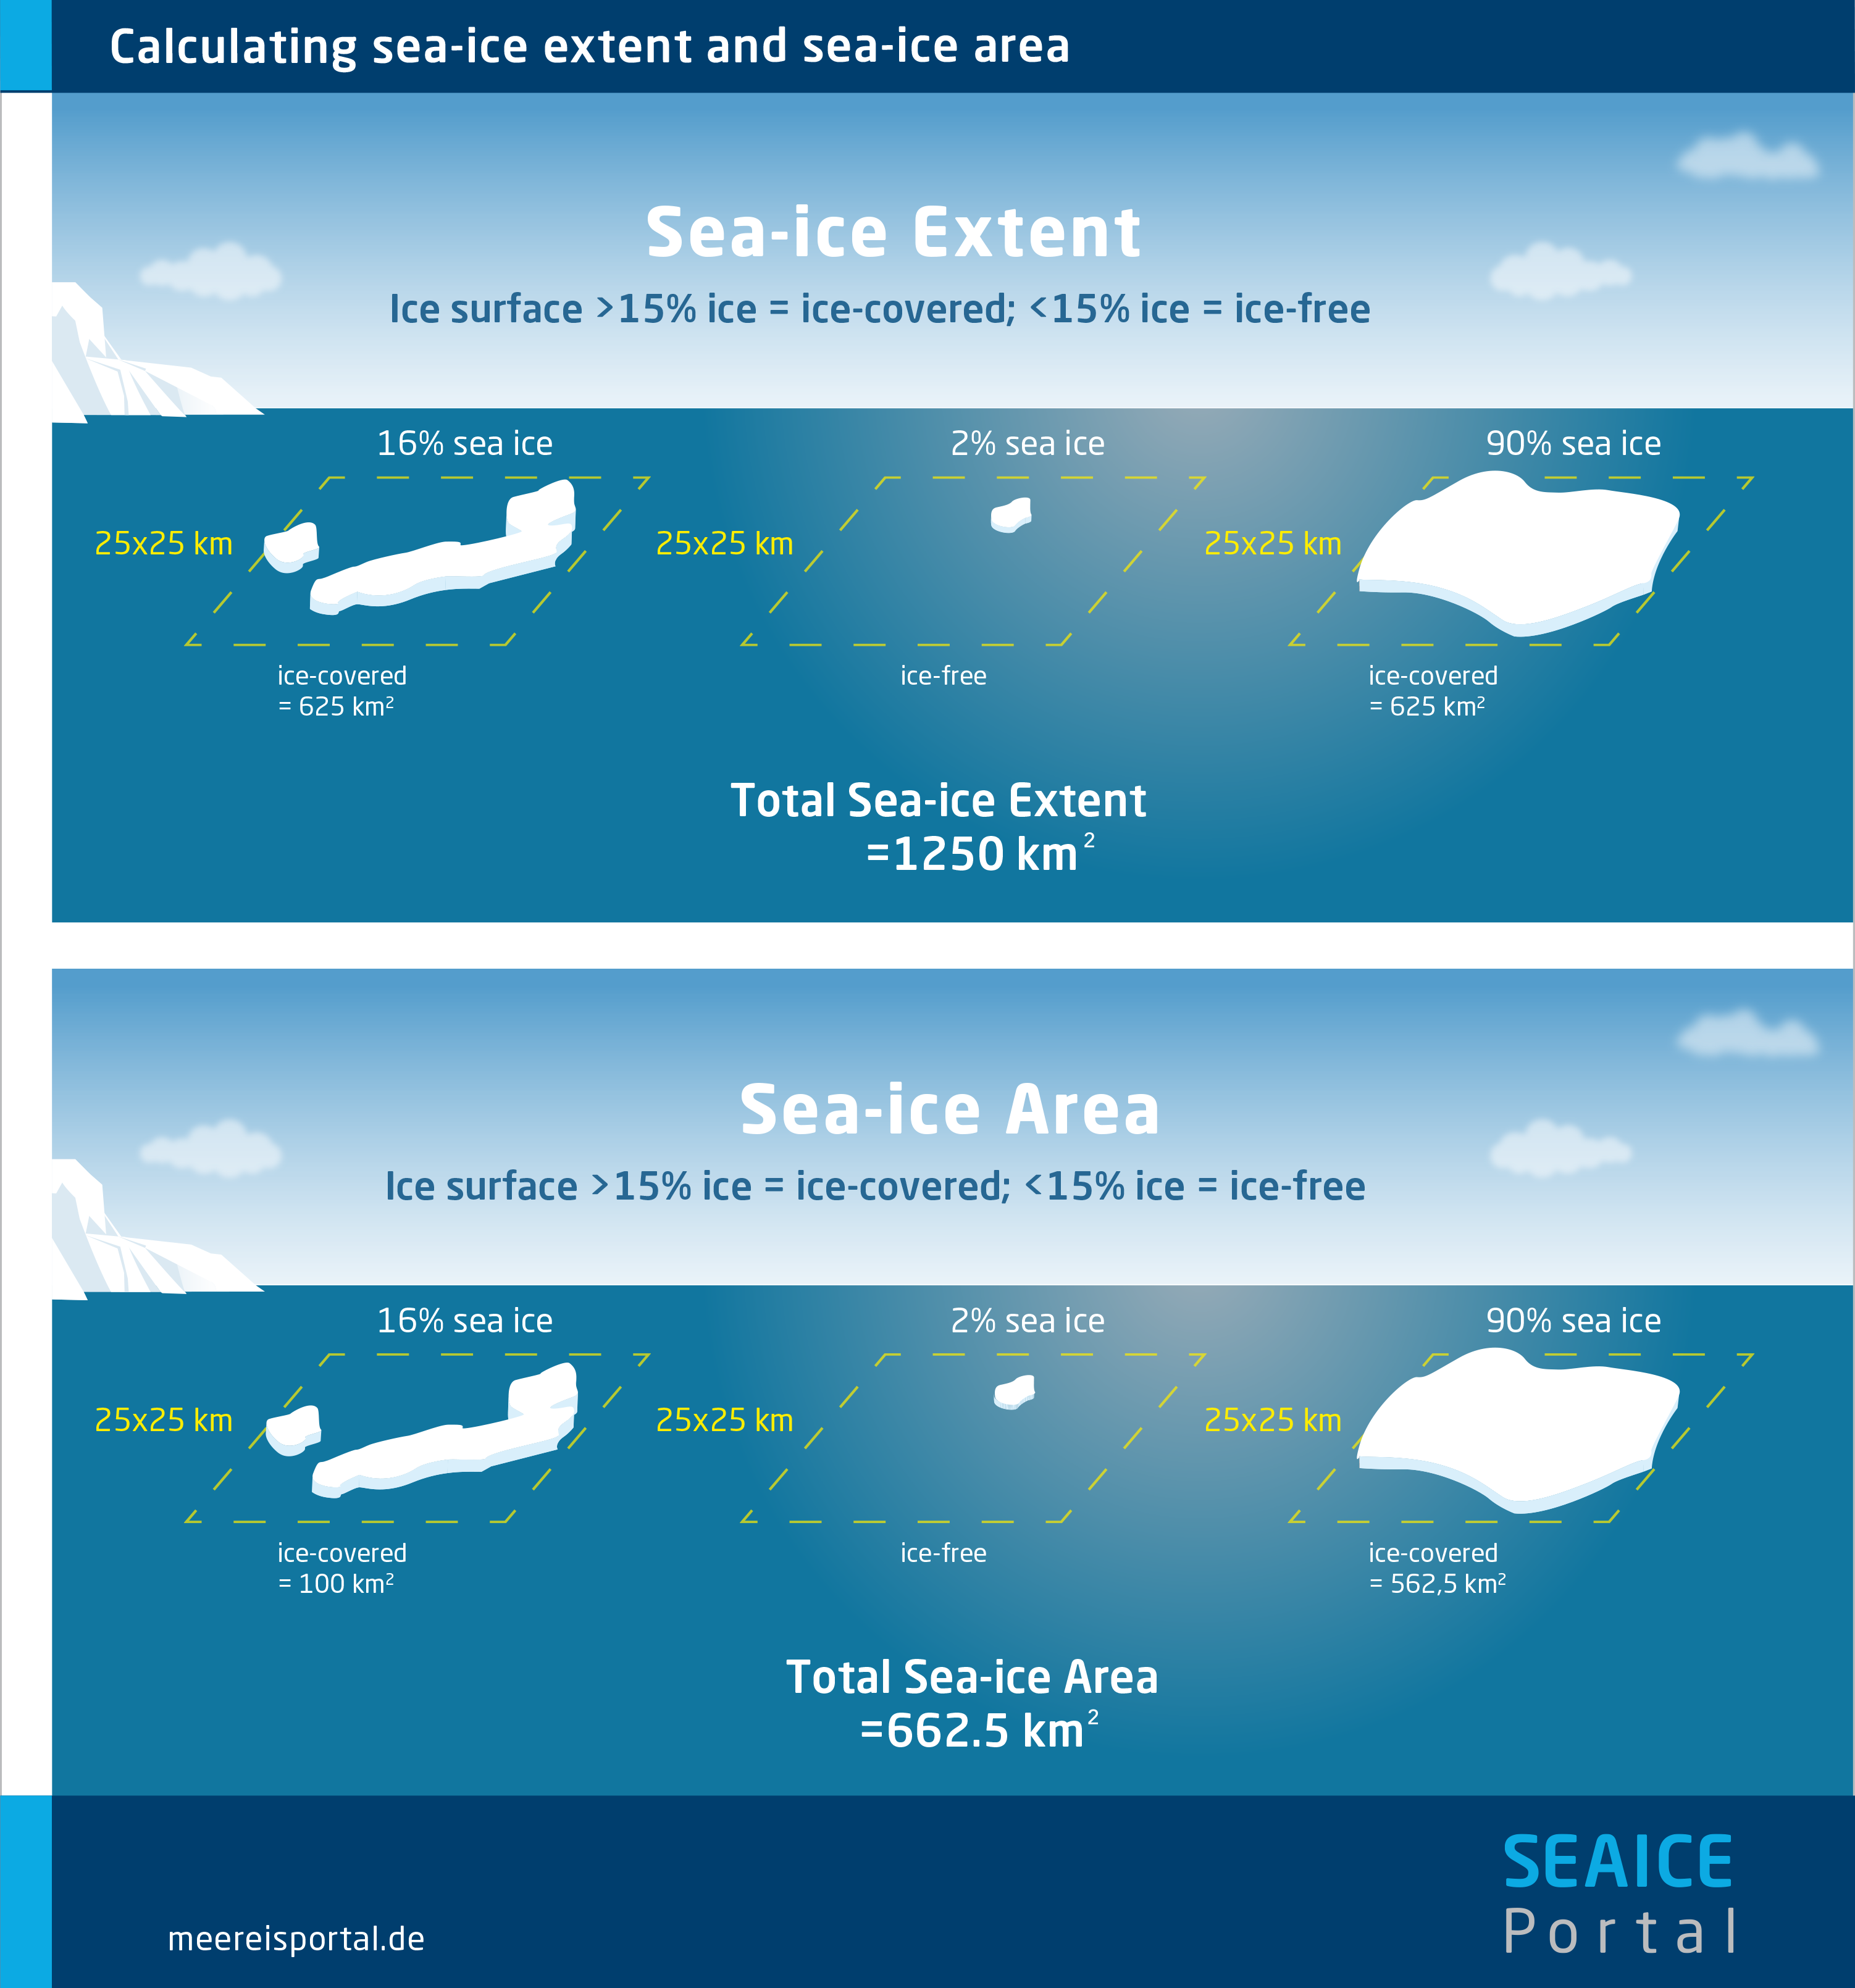 Calculating sea-ice extent and sea-ice area.